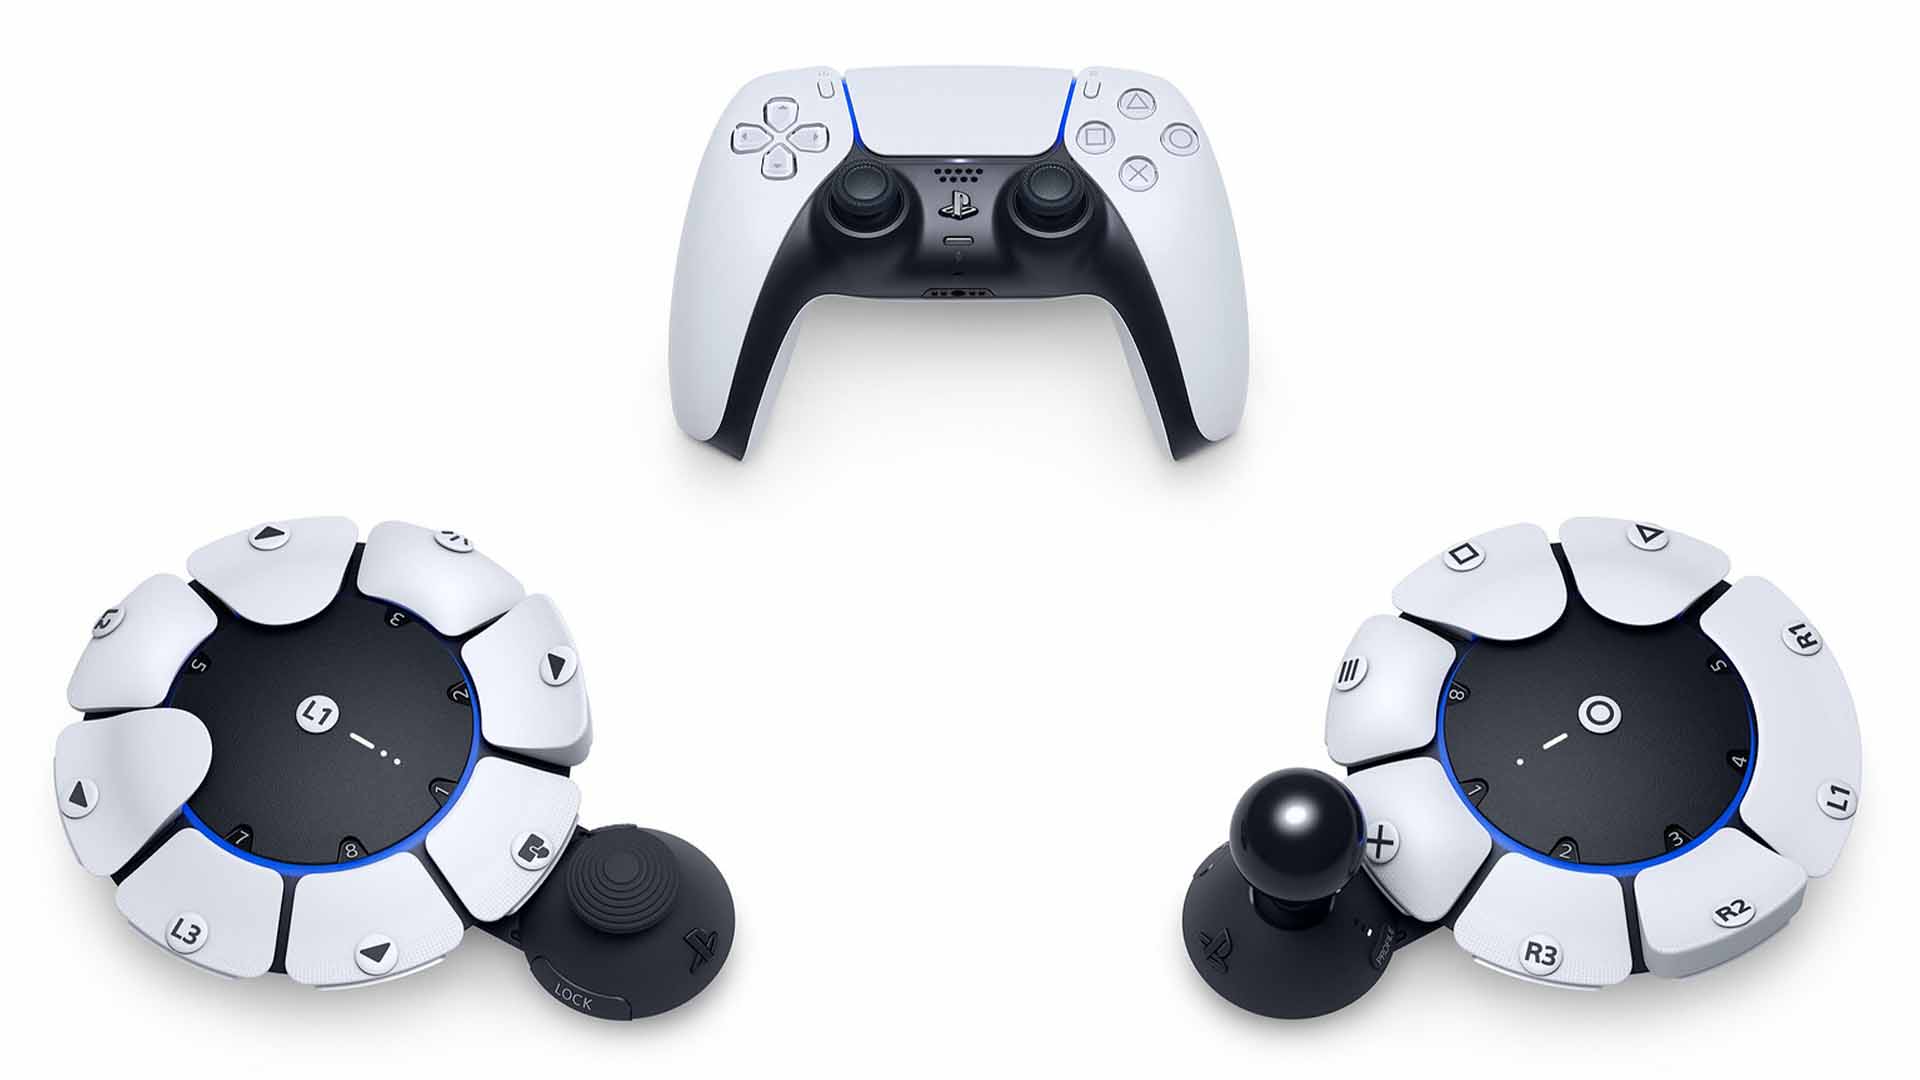 Project Leonardo is an accessibility controller for PlayStation 5